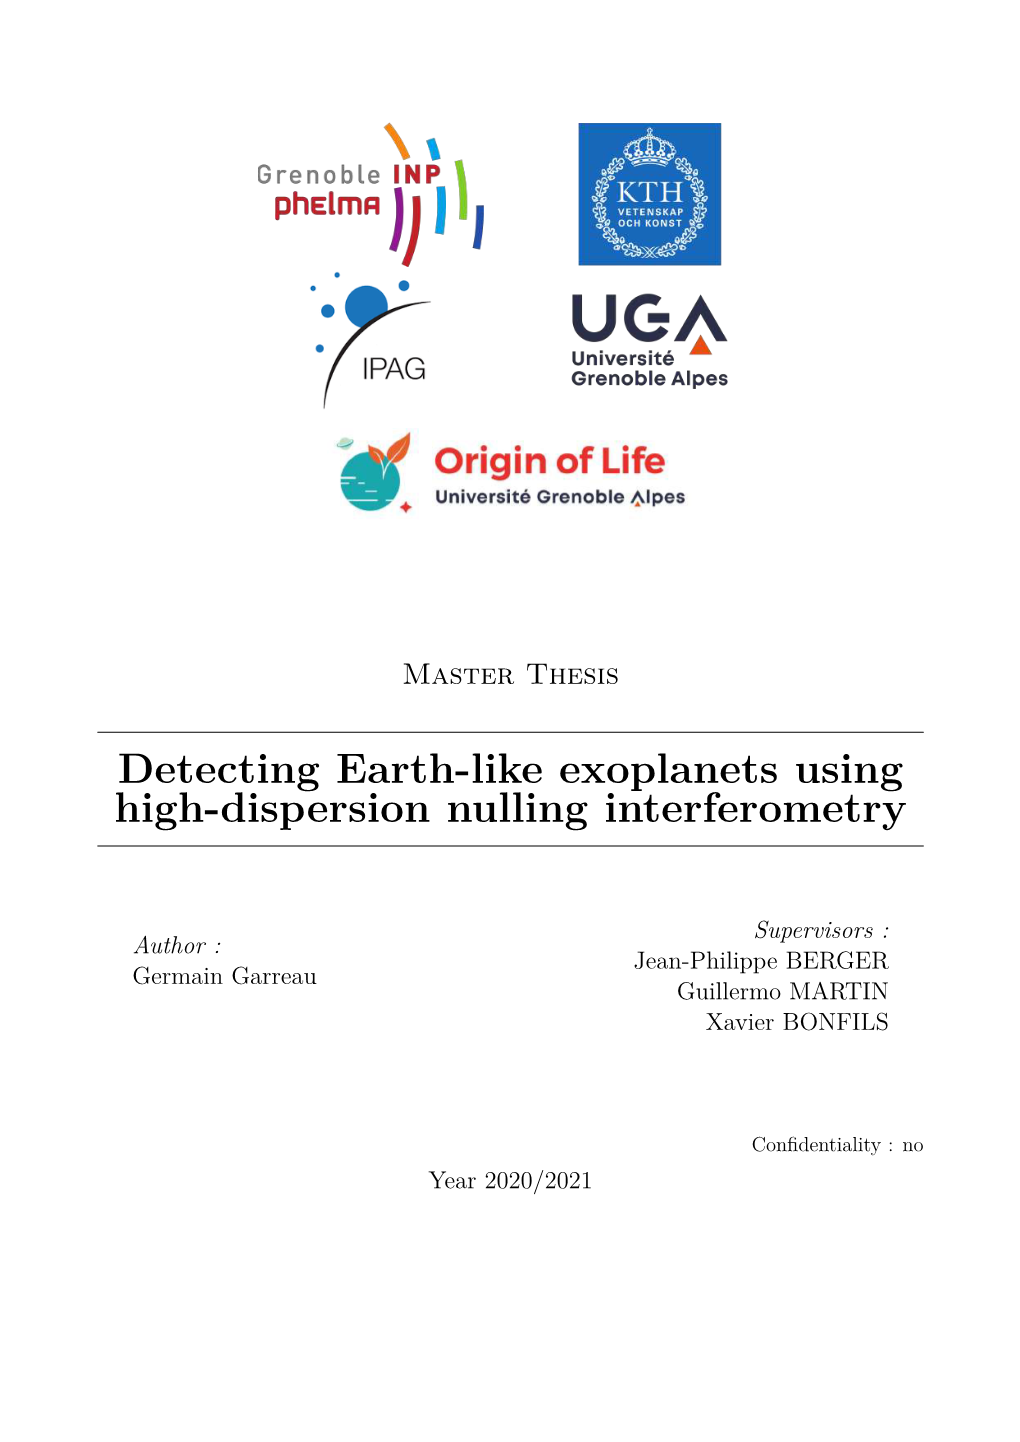 Detecting Earth-Like Exoplanets Using High-Dispersion Nulling Interferometry